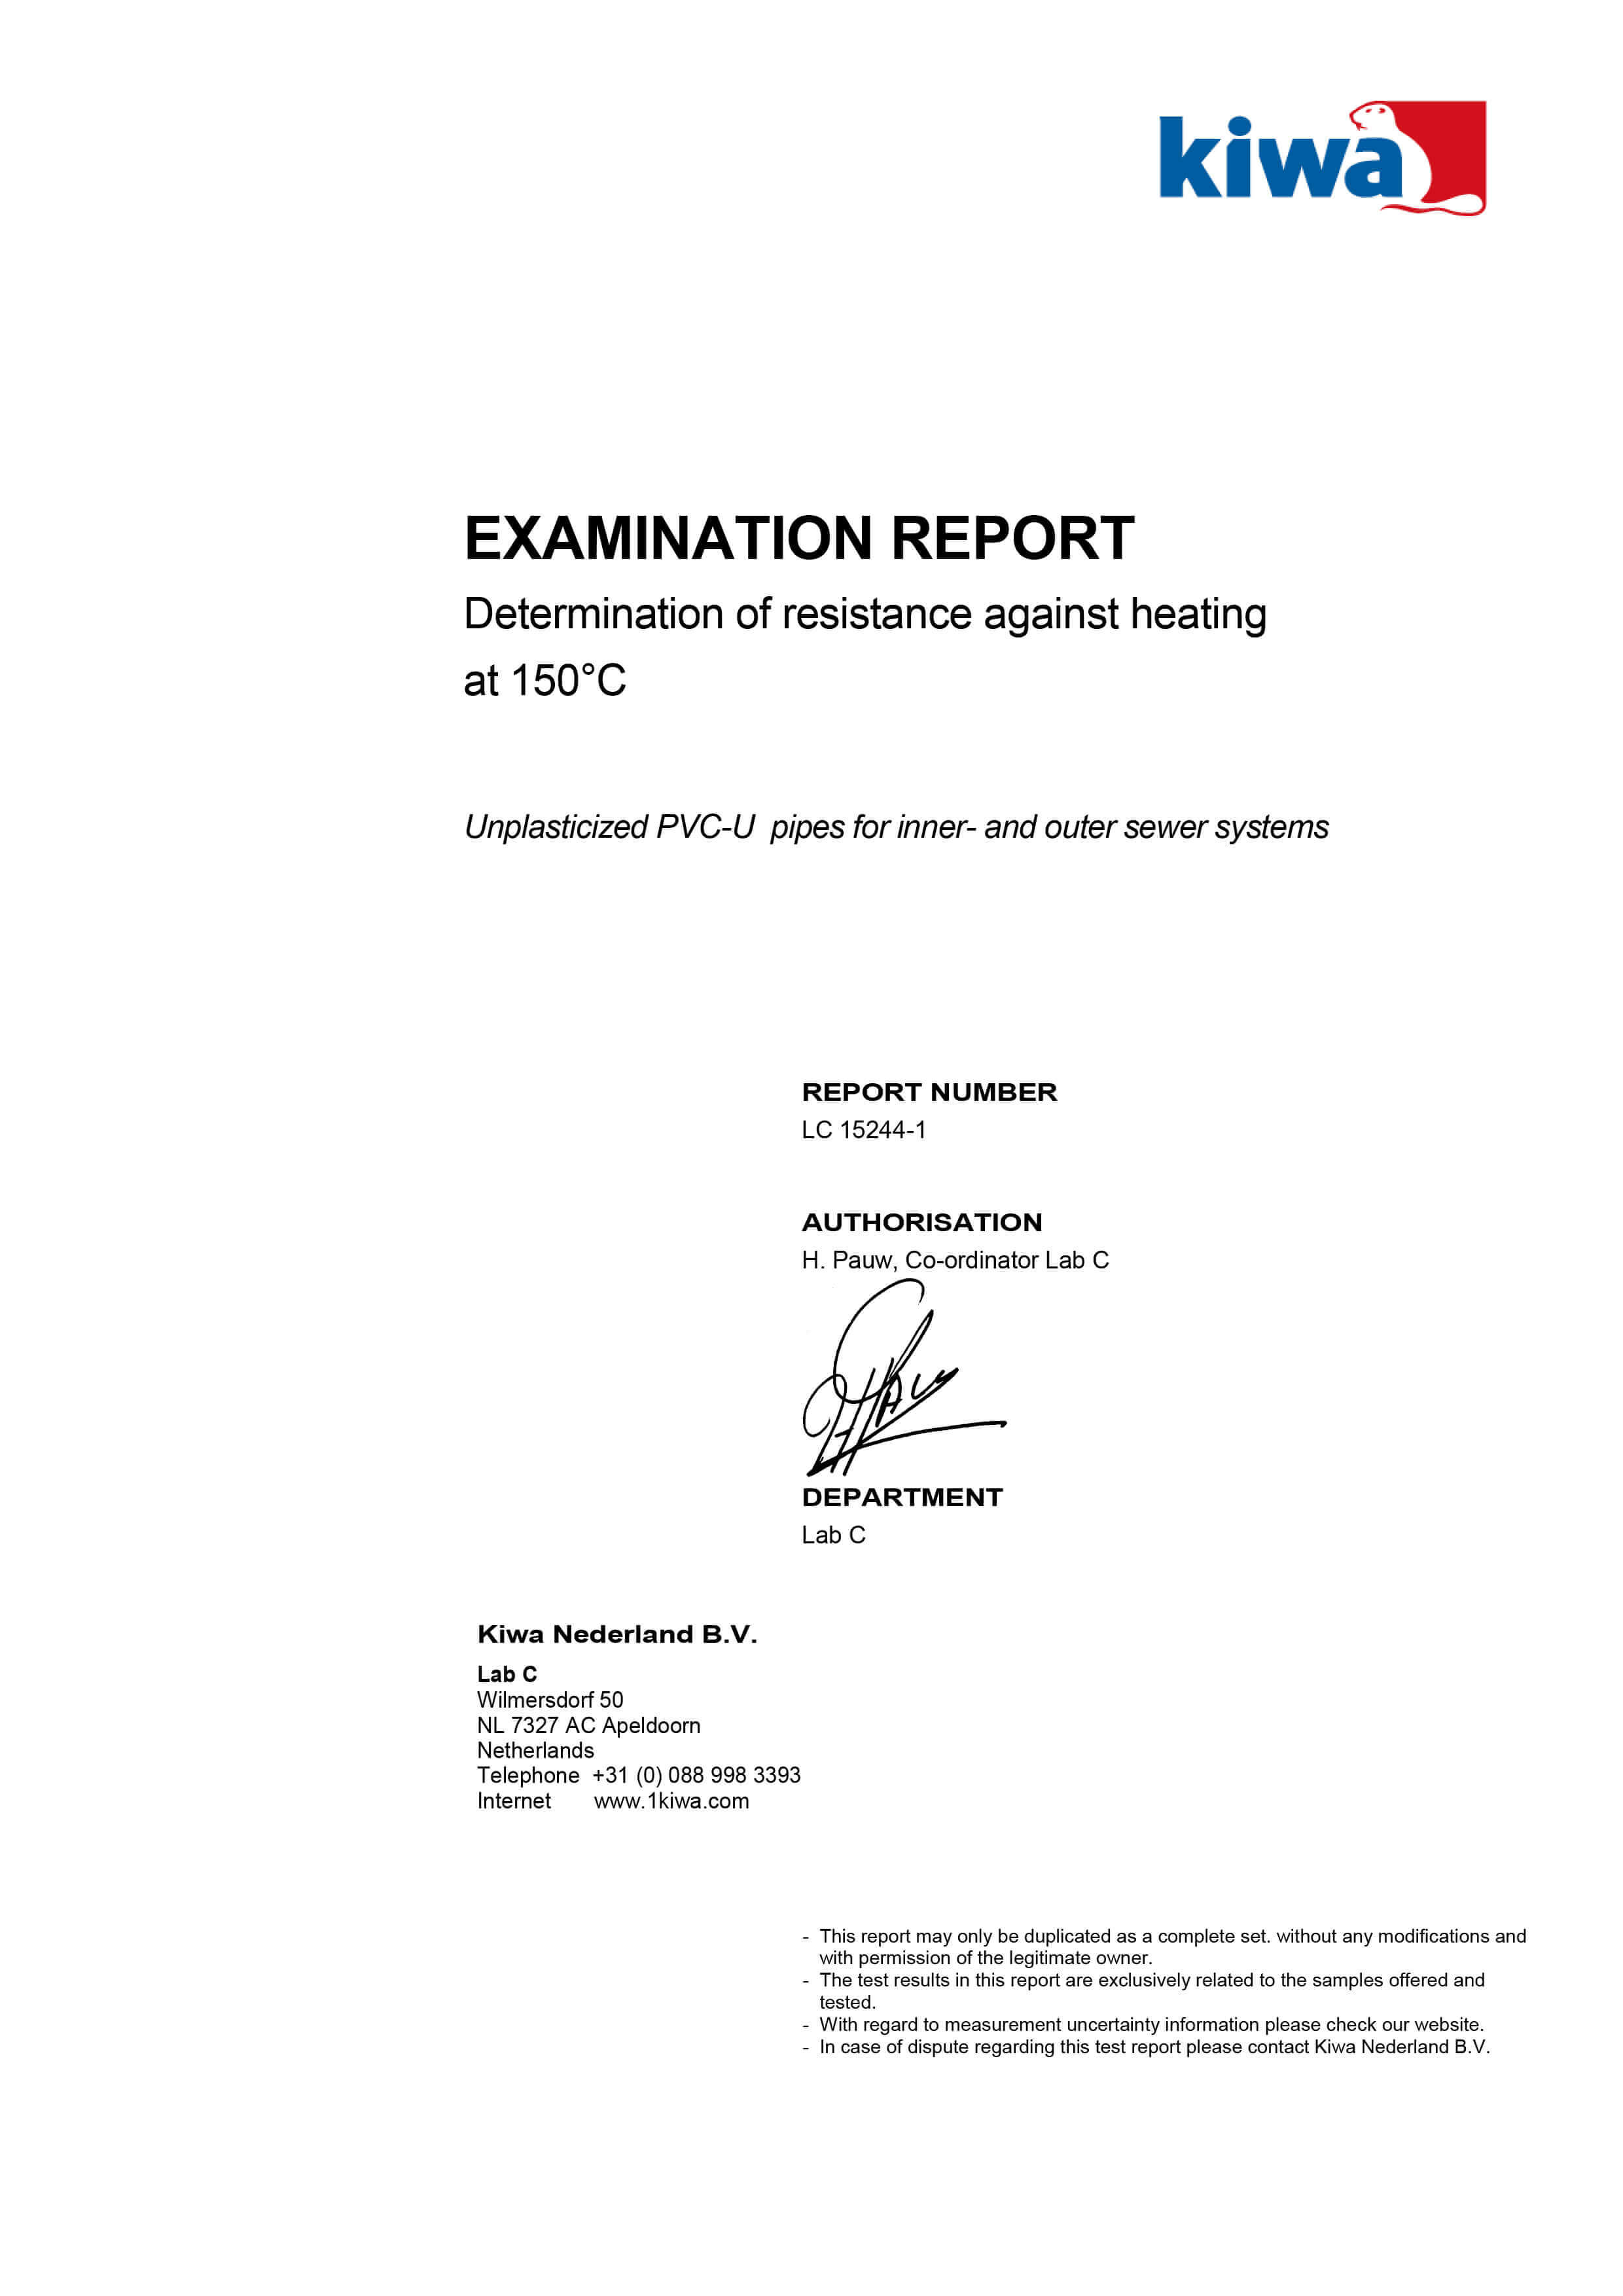 Haykal Plast Examination Report - Determination of resistance against heading at 150 degrees C - 1